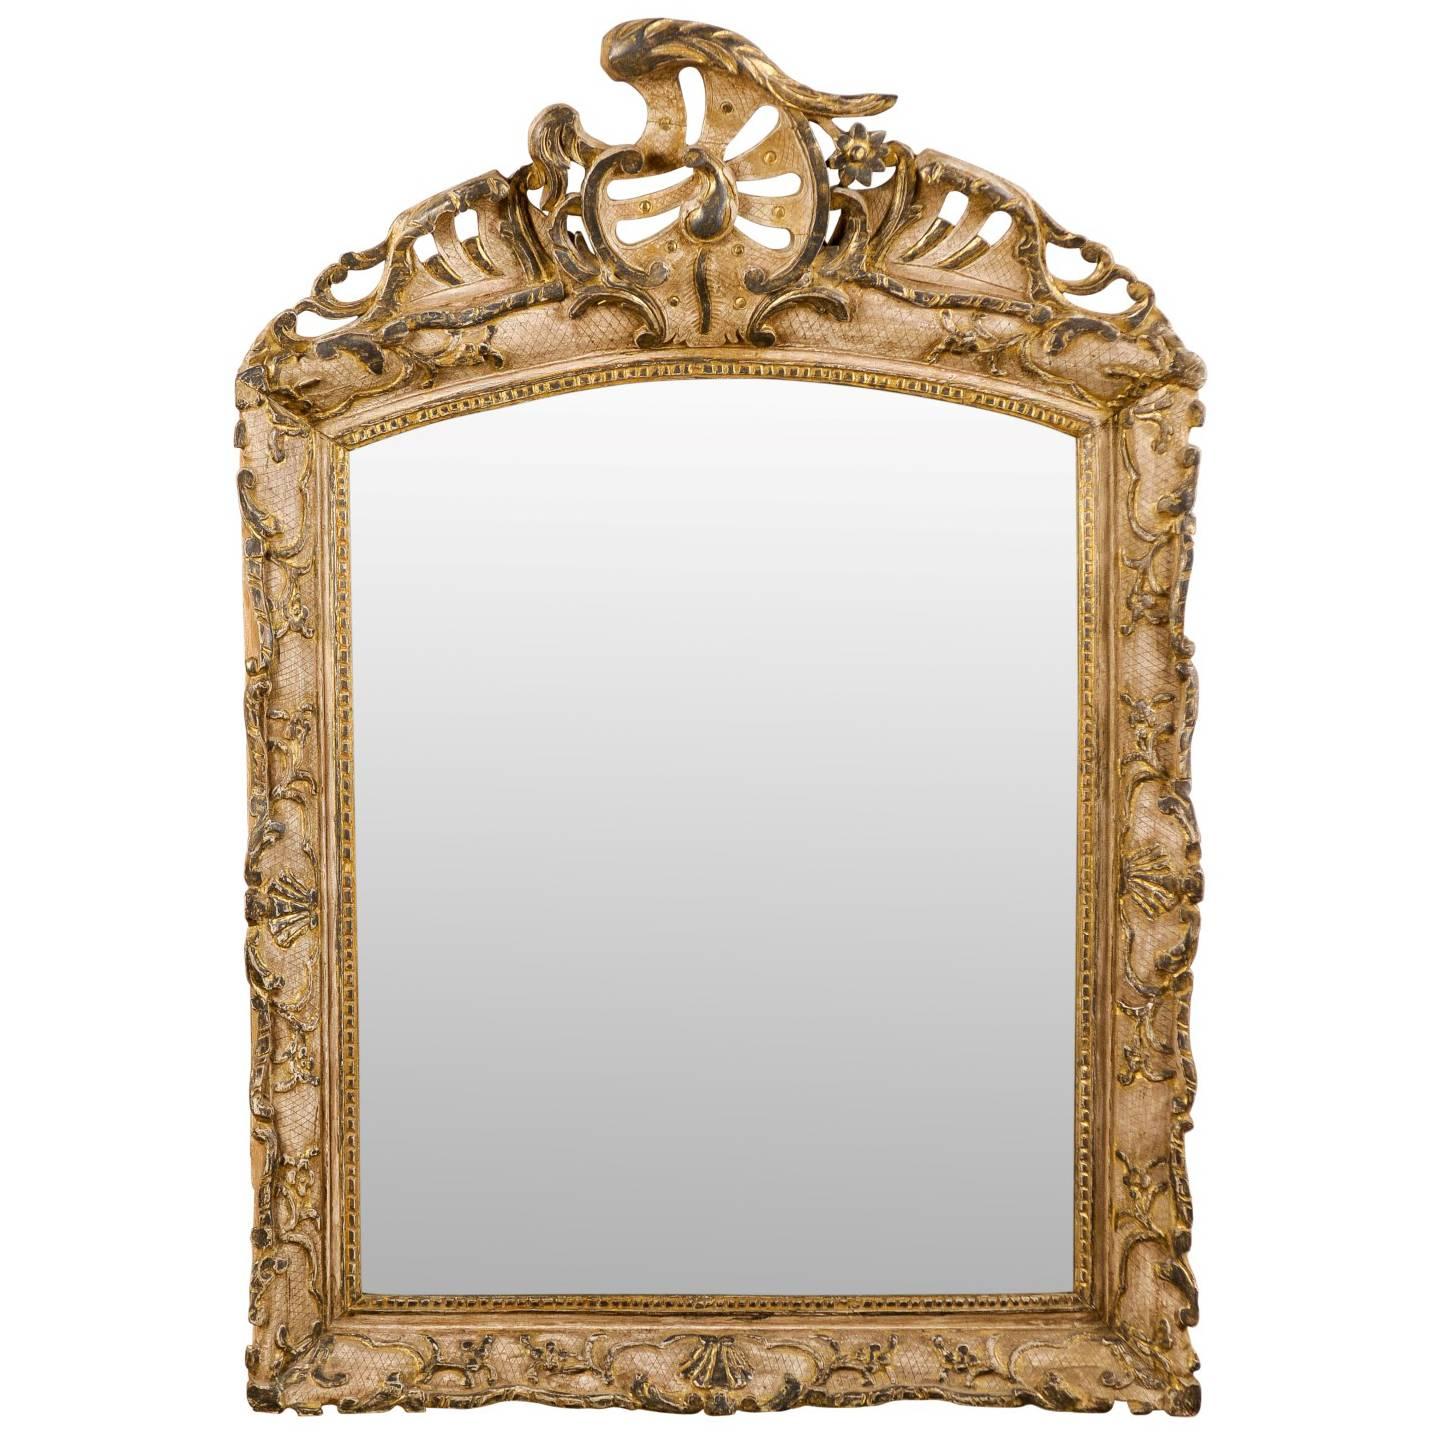 Italian Early 19th C. Rococo Style Mirror with Beautiful Pierce-Carved Crest